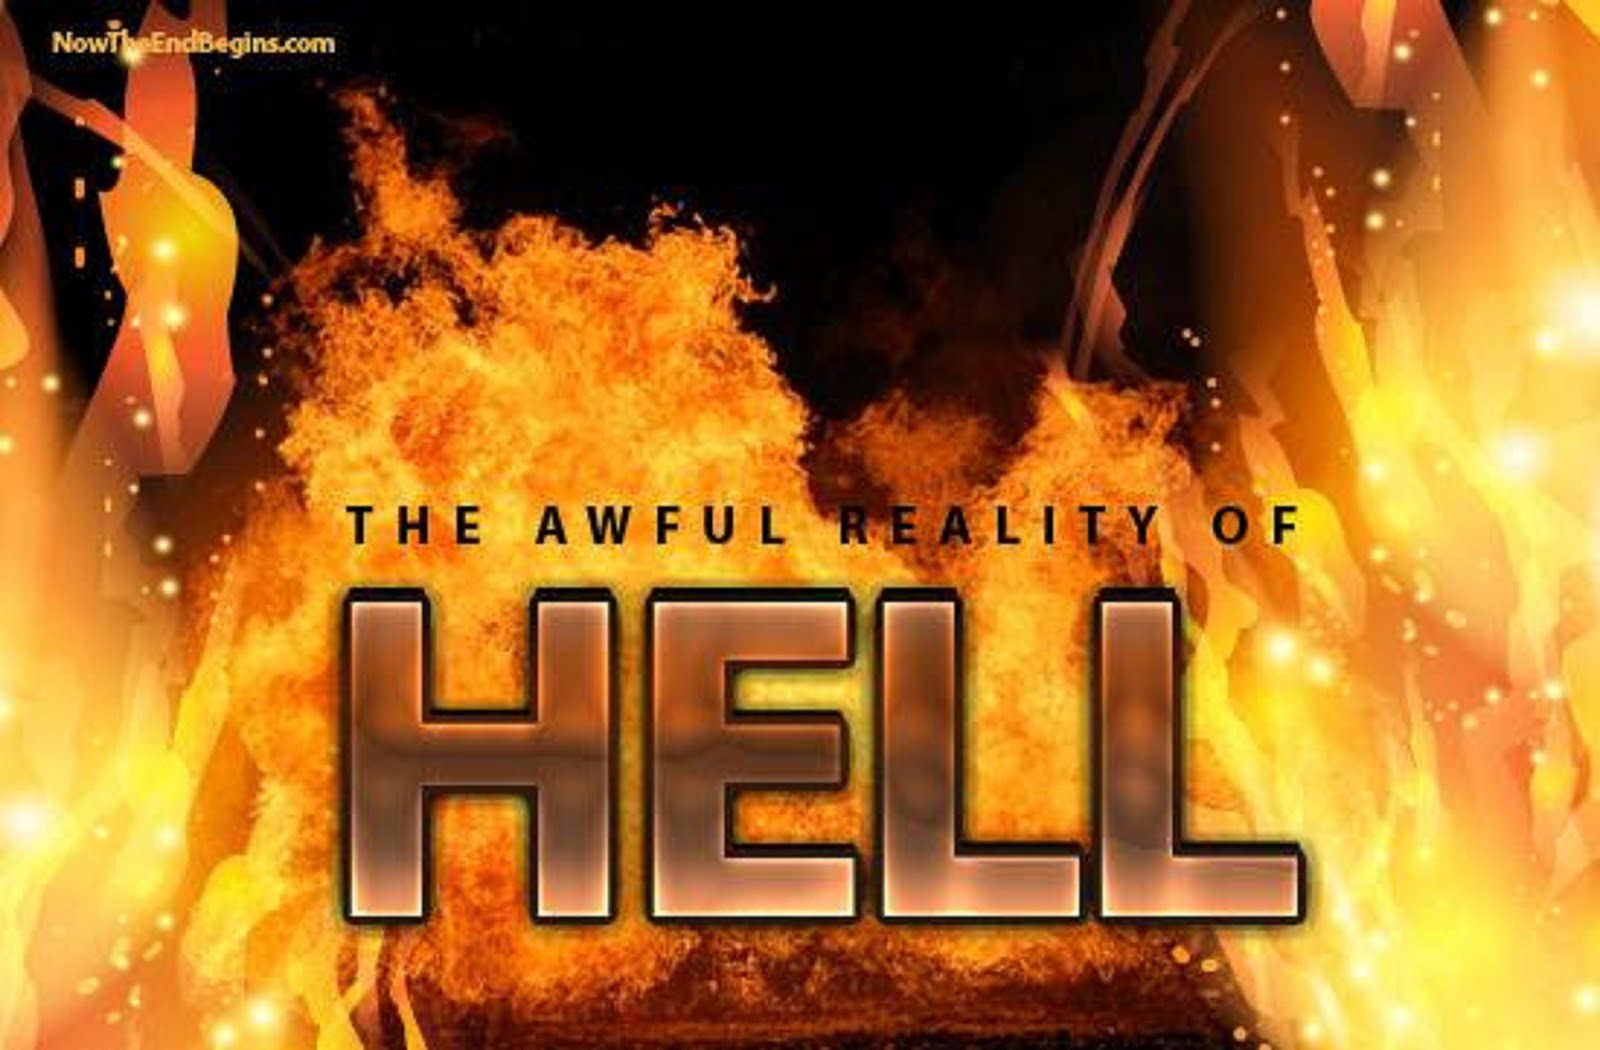 THE AWFUL REALITY OF HELL